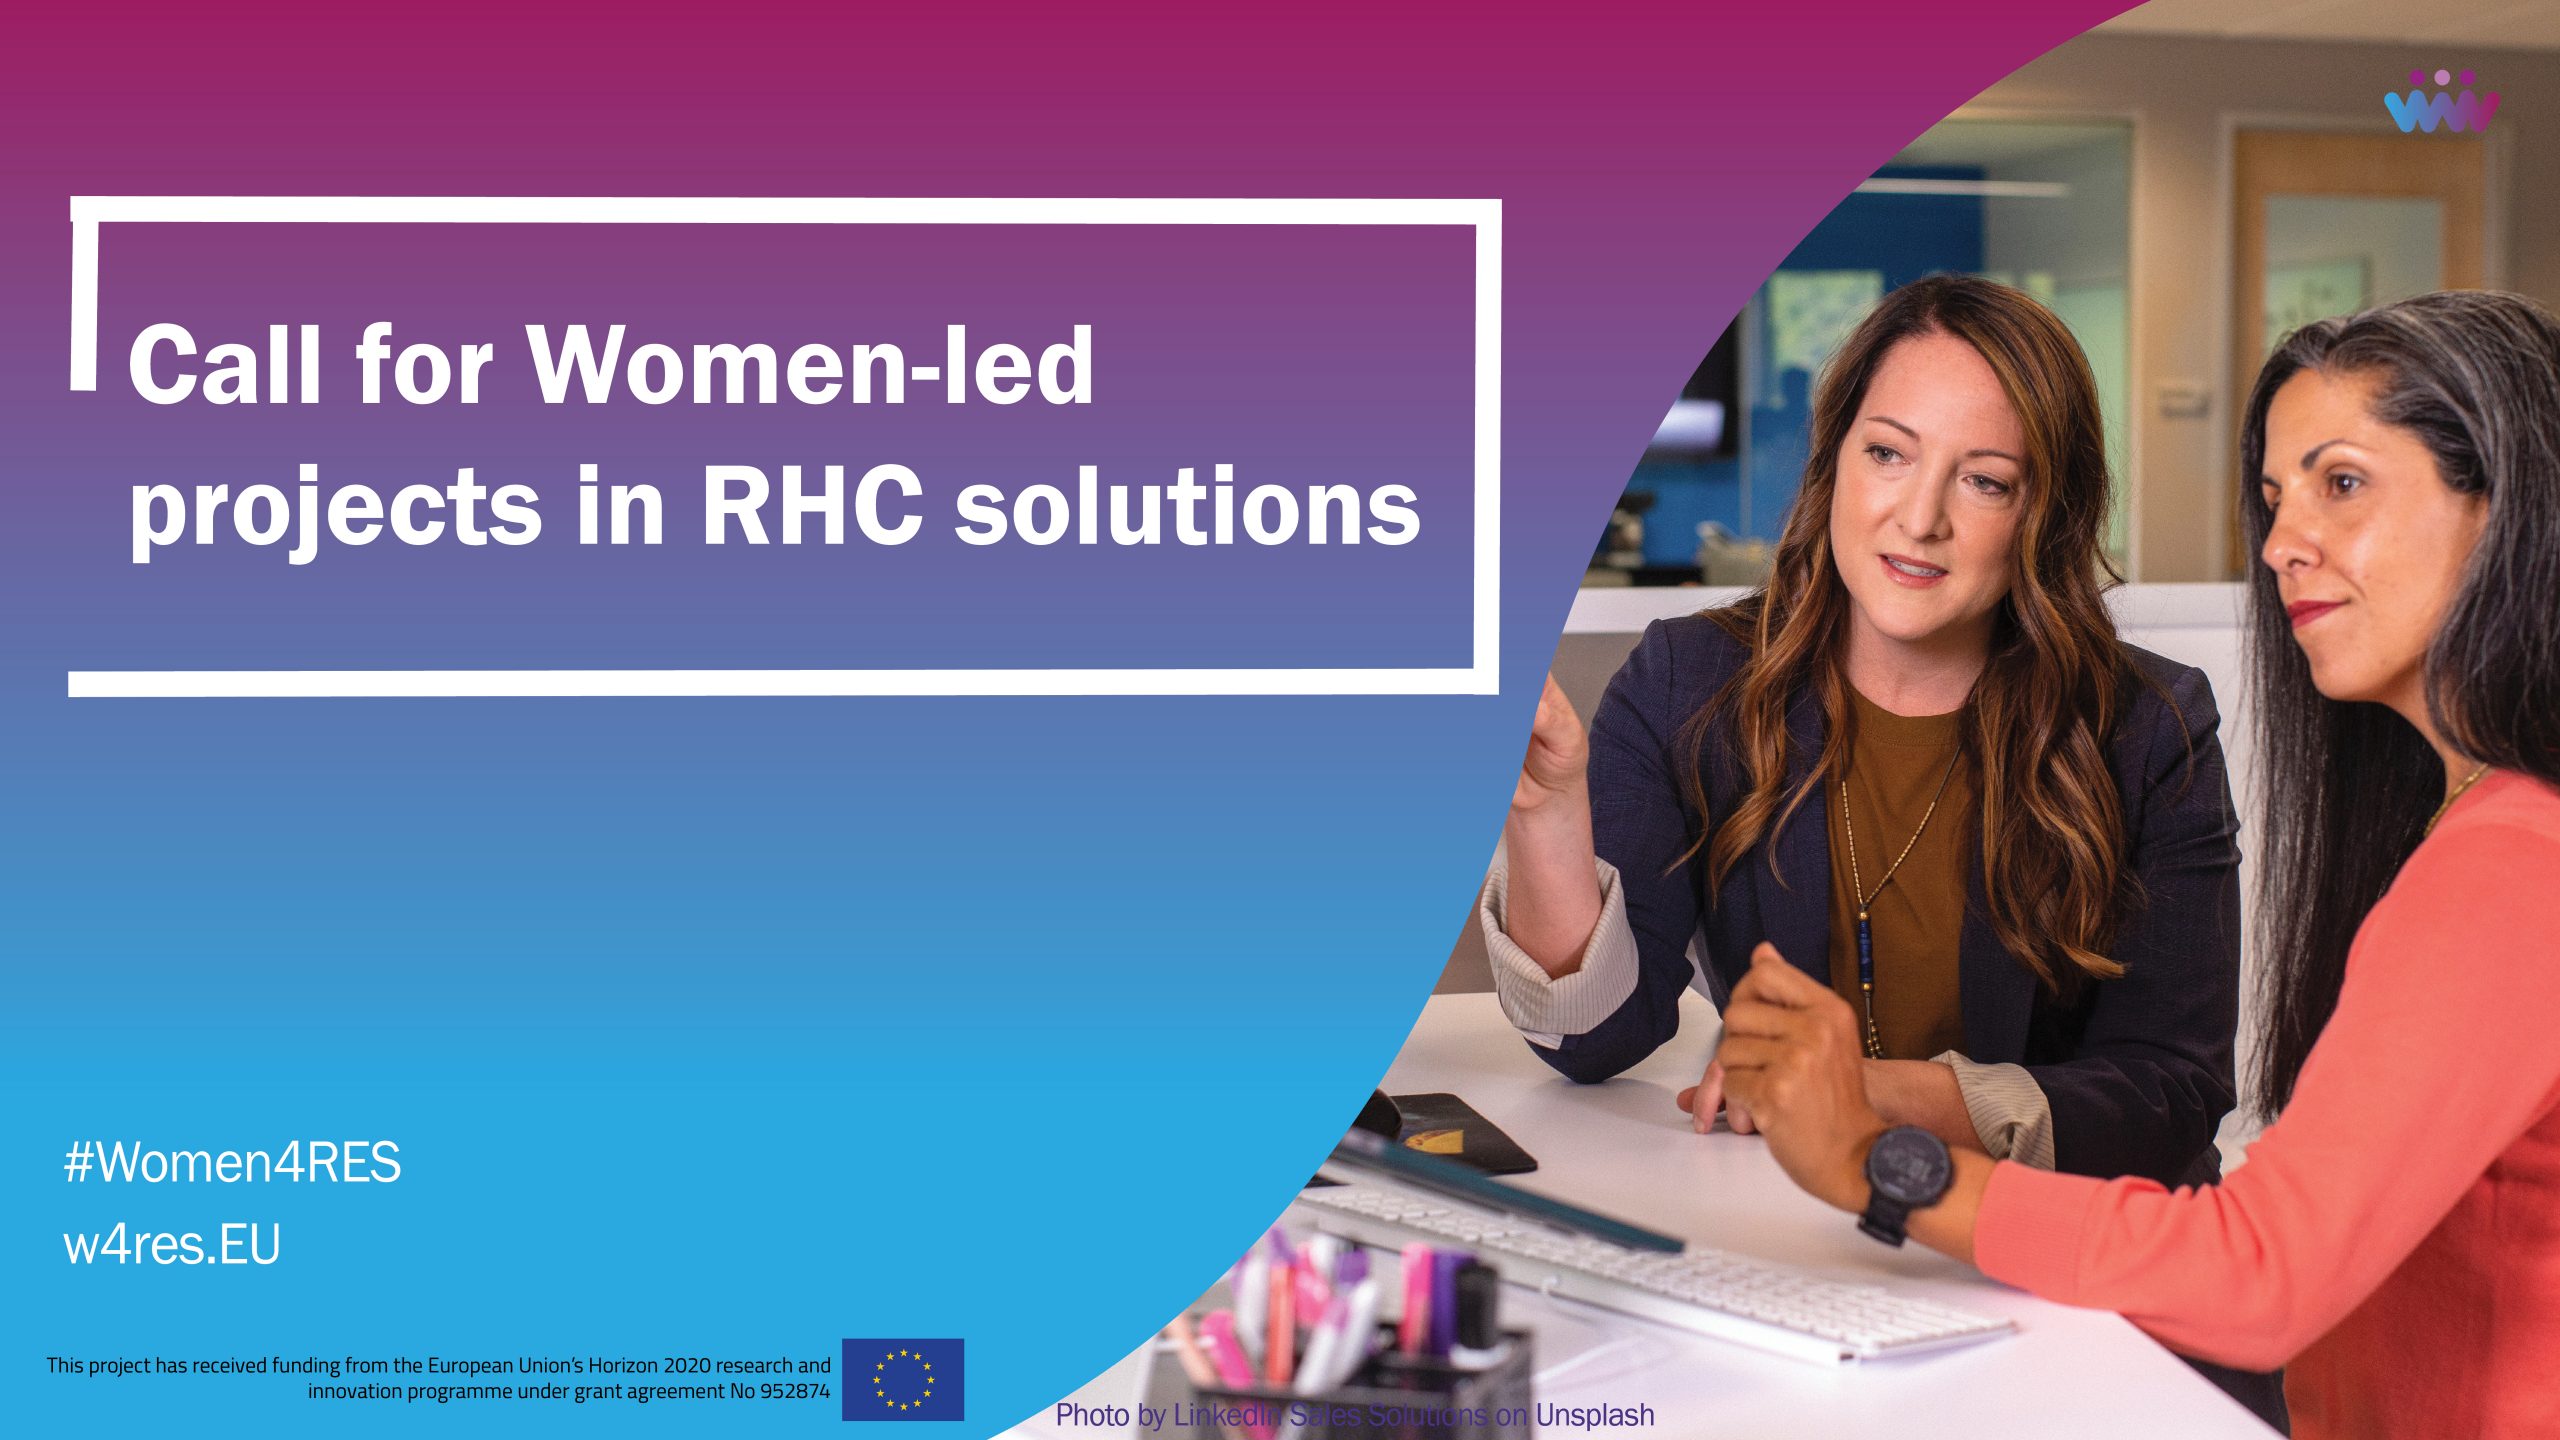 Call for women-led projects in RHC solutions